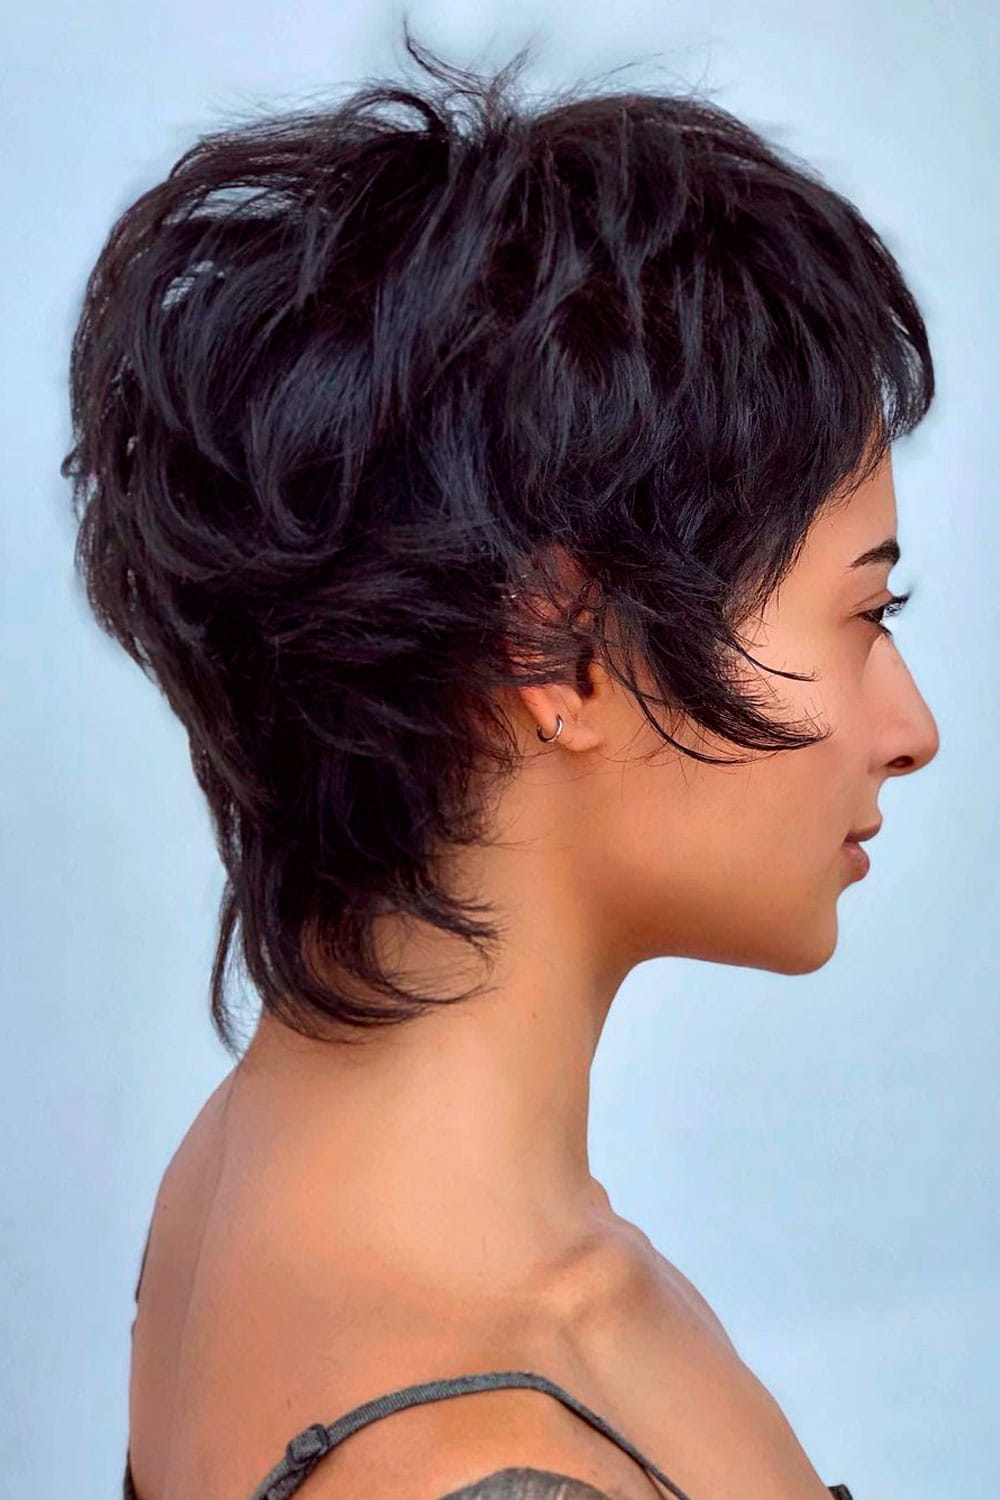 100+ Best Short Hairstyles & Haircuts For Women images 69